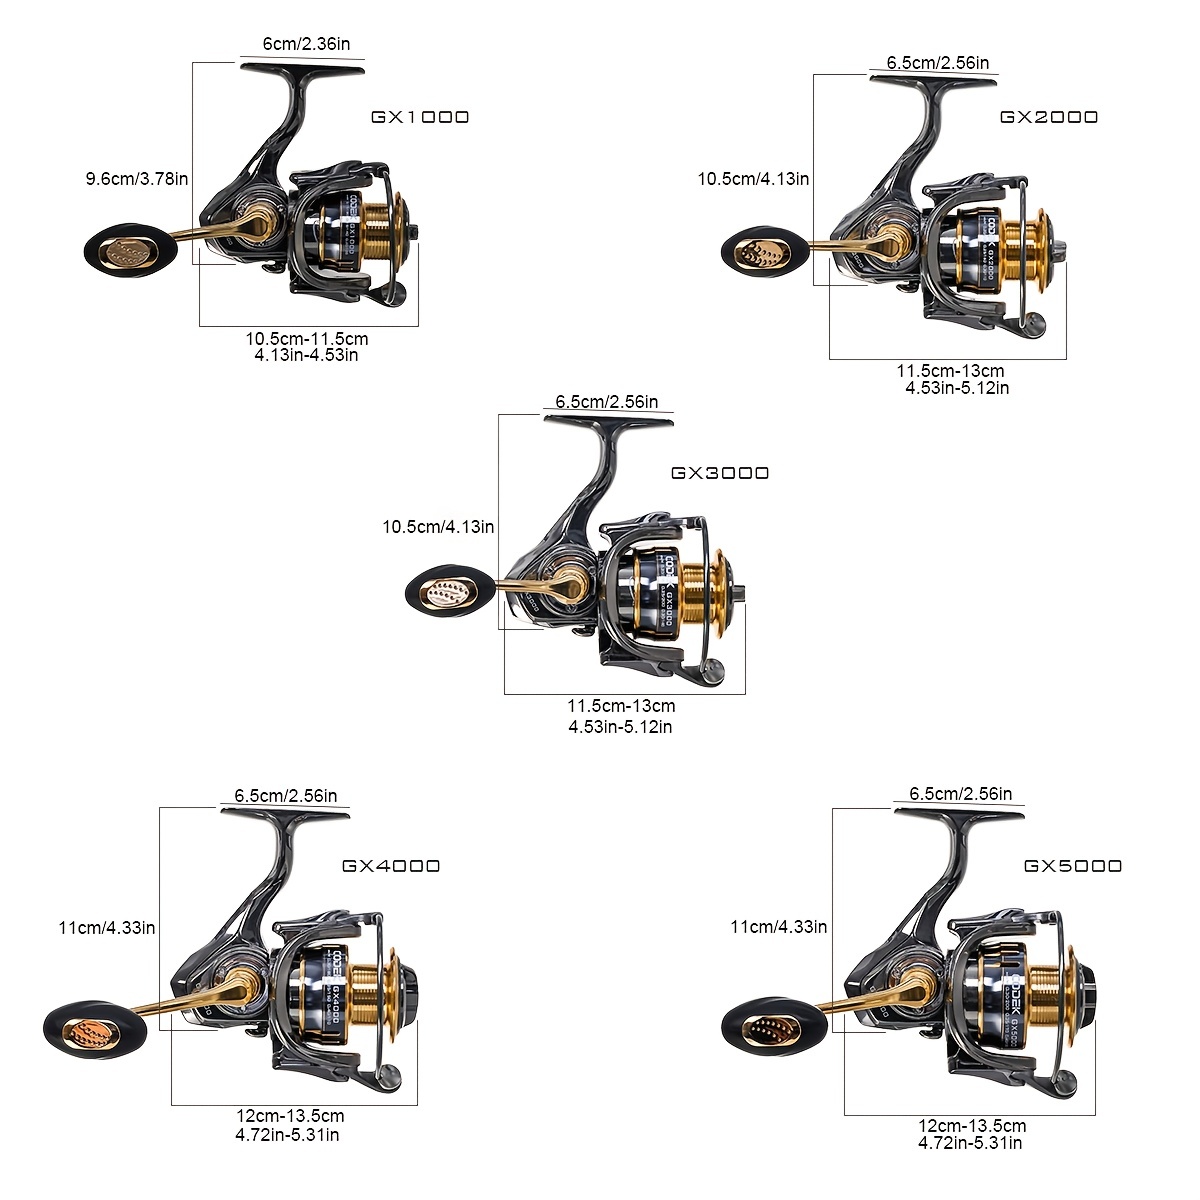 Spinning Reel - 13BB Spinning Fishing Reel with Left Right Interchangeable  Collapsible Wood Handle Metal Body, 5.2:1 High Speed Gear Ratio, Ultralight  Fishing Reel for Freshwater or Saltwater price in Saudi Arabia